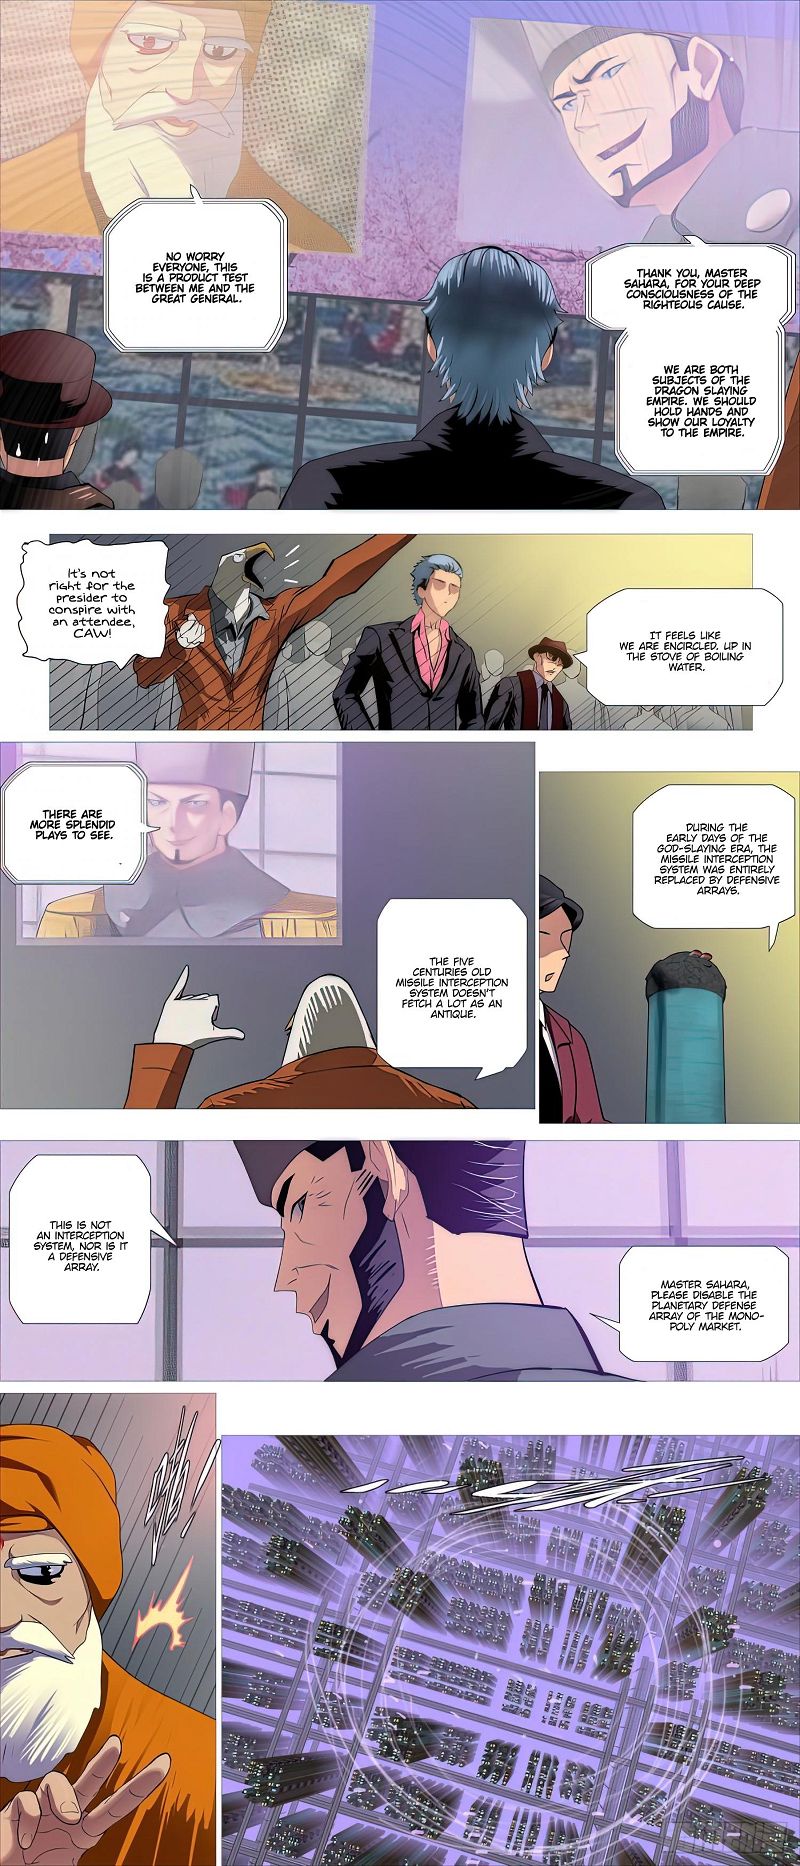 Iron Ladies Chapter 508 page 3